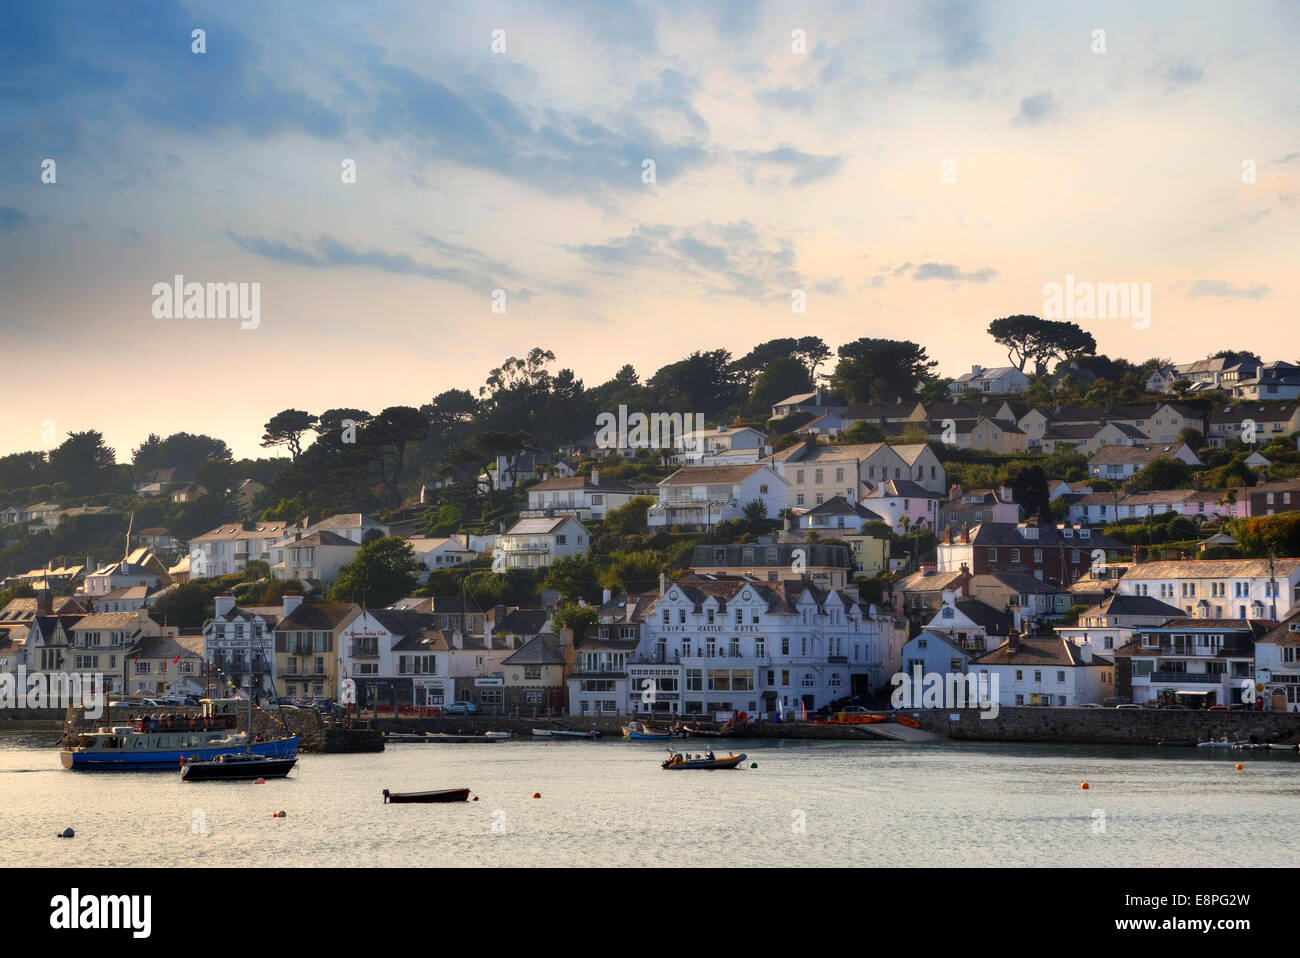 St Mawes, Cornwall, Angleterre, Royaume-Uni Banque D'Images